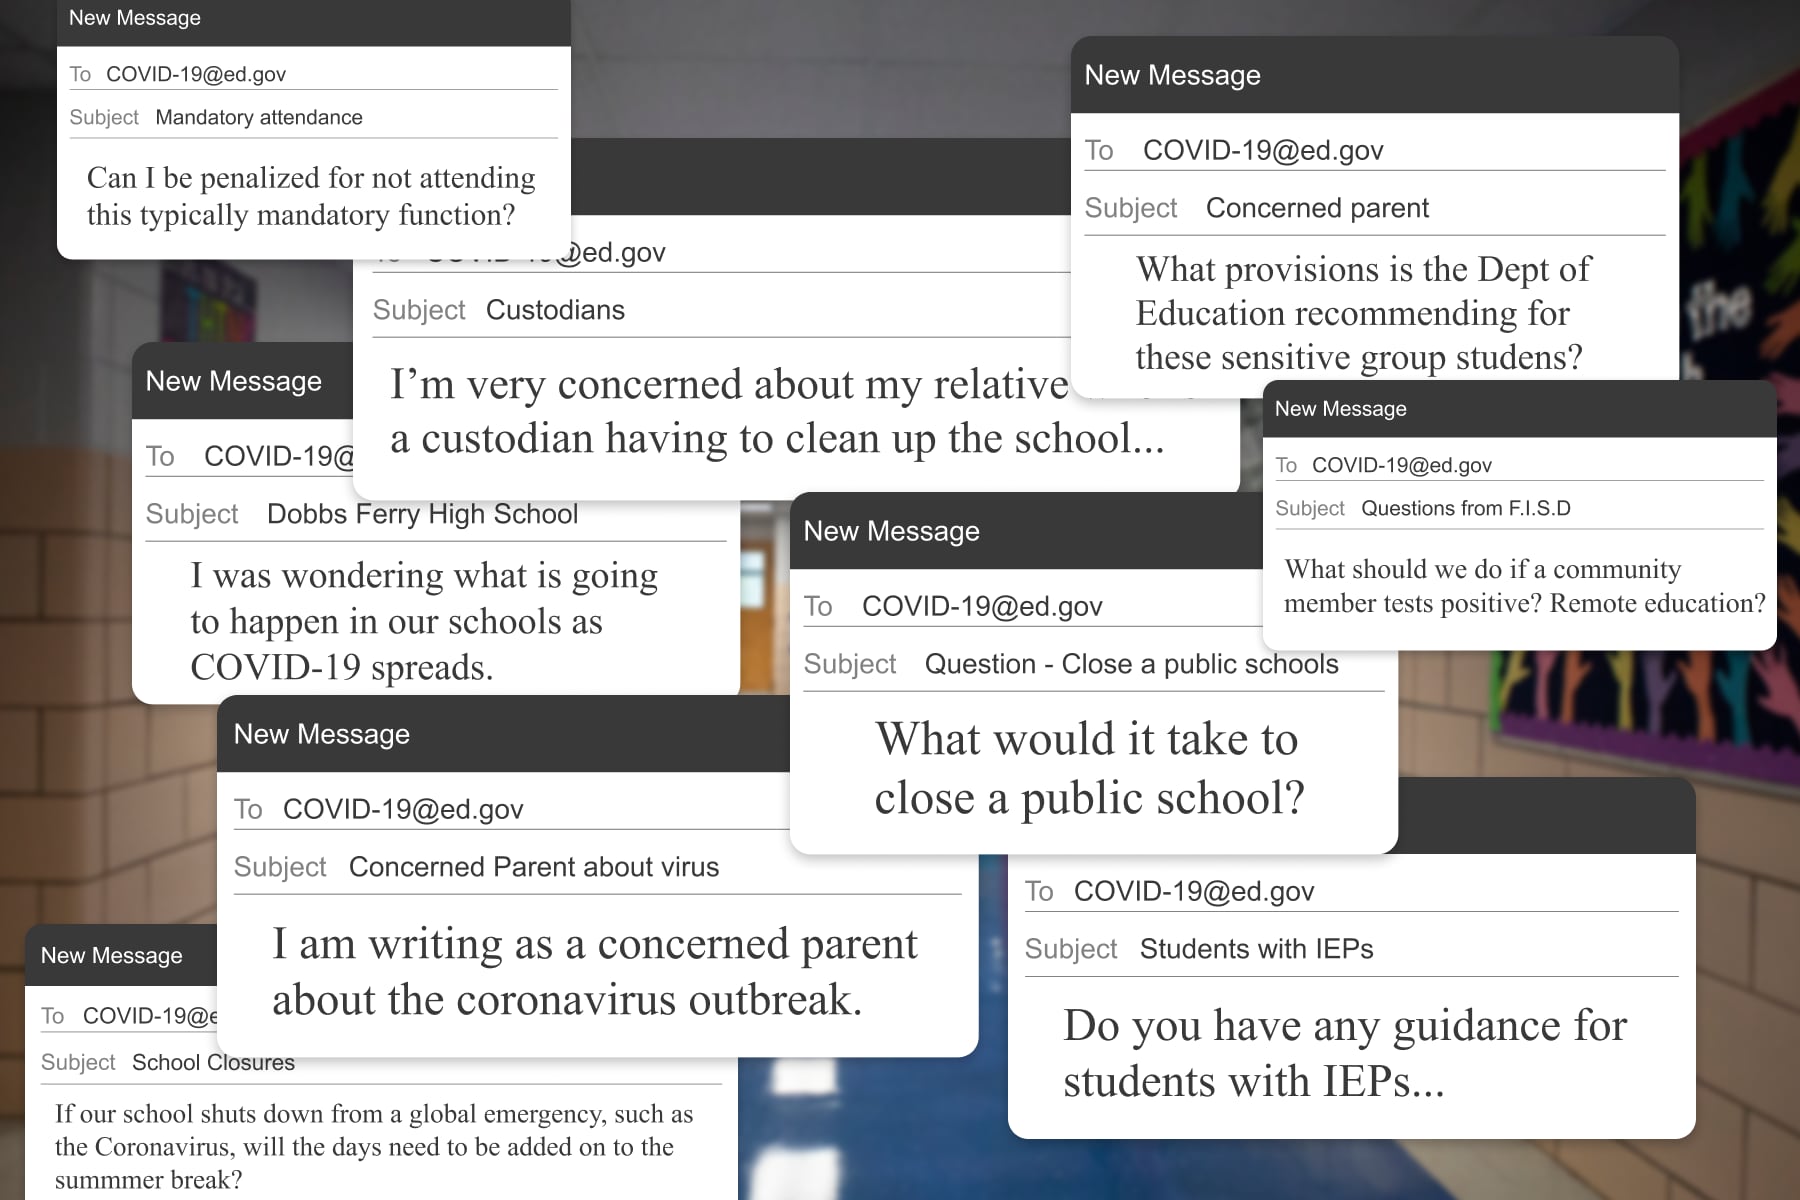 An overwhelming number of emails asking questions about school procedures surrounding the coronavirus.